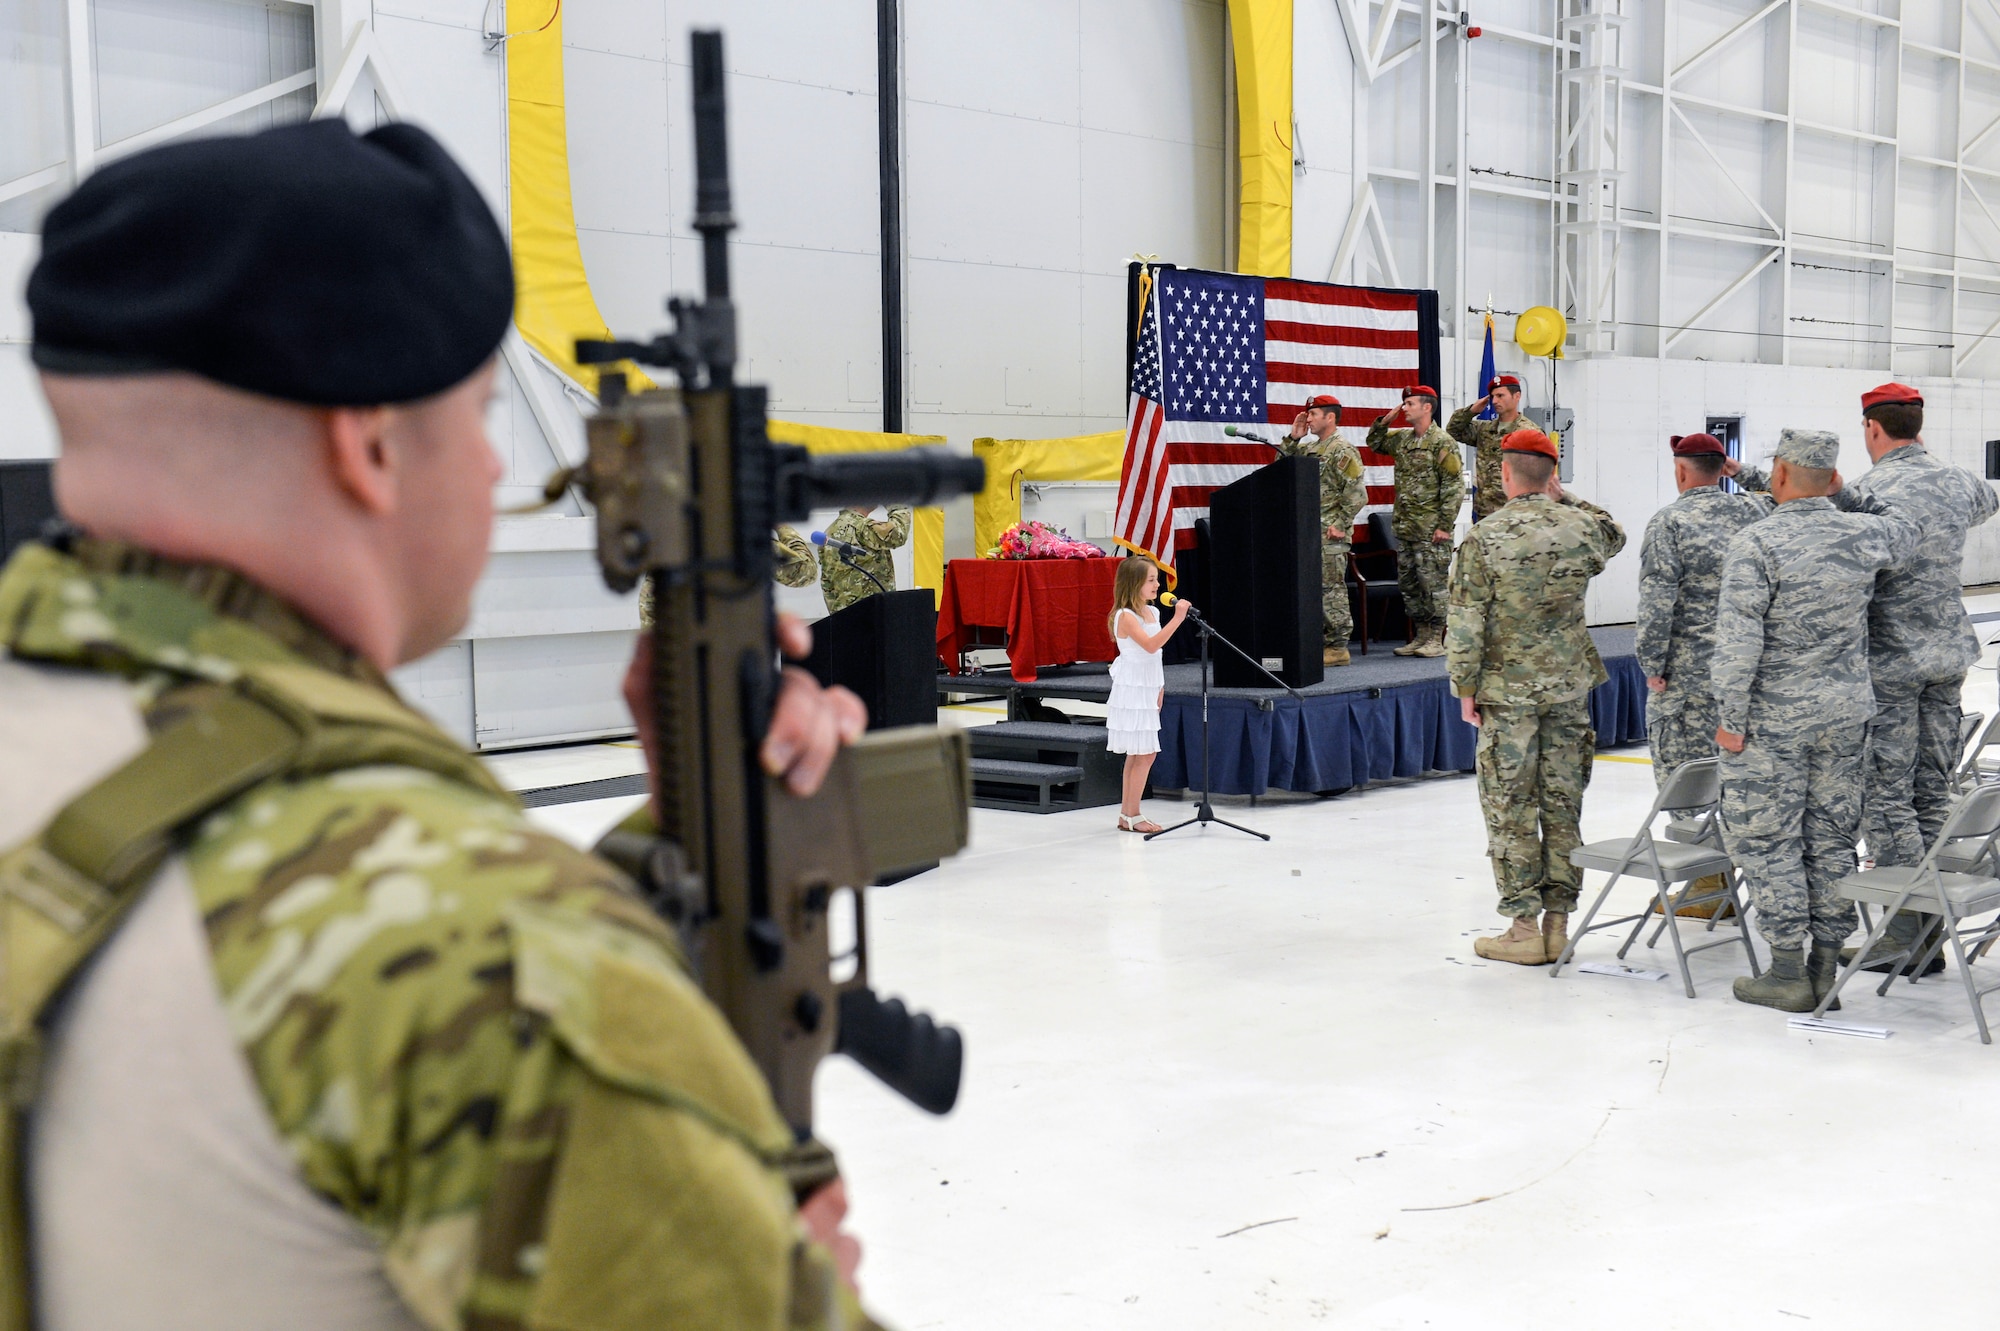 The daughter of Col. Thad Allen, outgoing 22nd Special Tactics Squadron commander, sings the National Anthem in front of members of 22nd STS and their families during a change of command ceremony, June 3, 2014, at Joint Base Lewis-McChord, Wash. The 22nd STS is responsible for training, equipping and employing combat control, tactical air control party and combat mission support personnel. (U.S. Air Force photo/Staff Sgt. Russ Jackson)